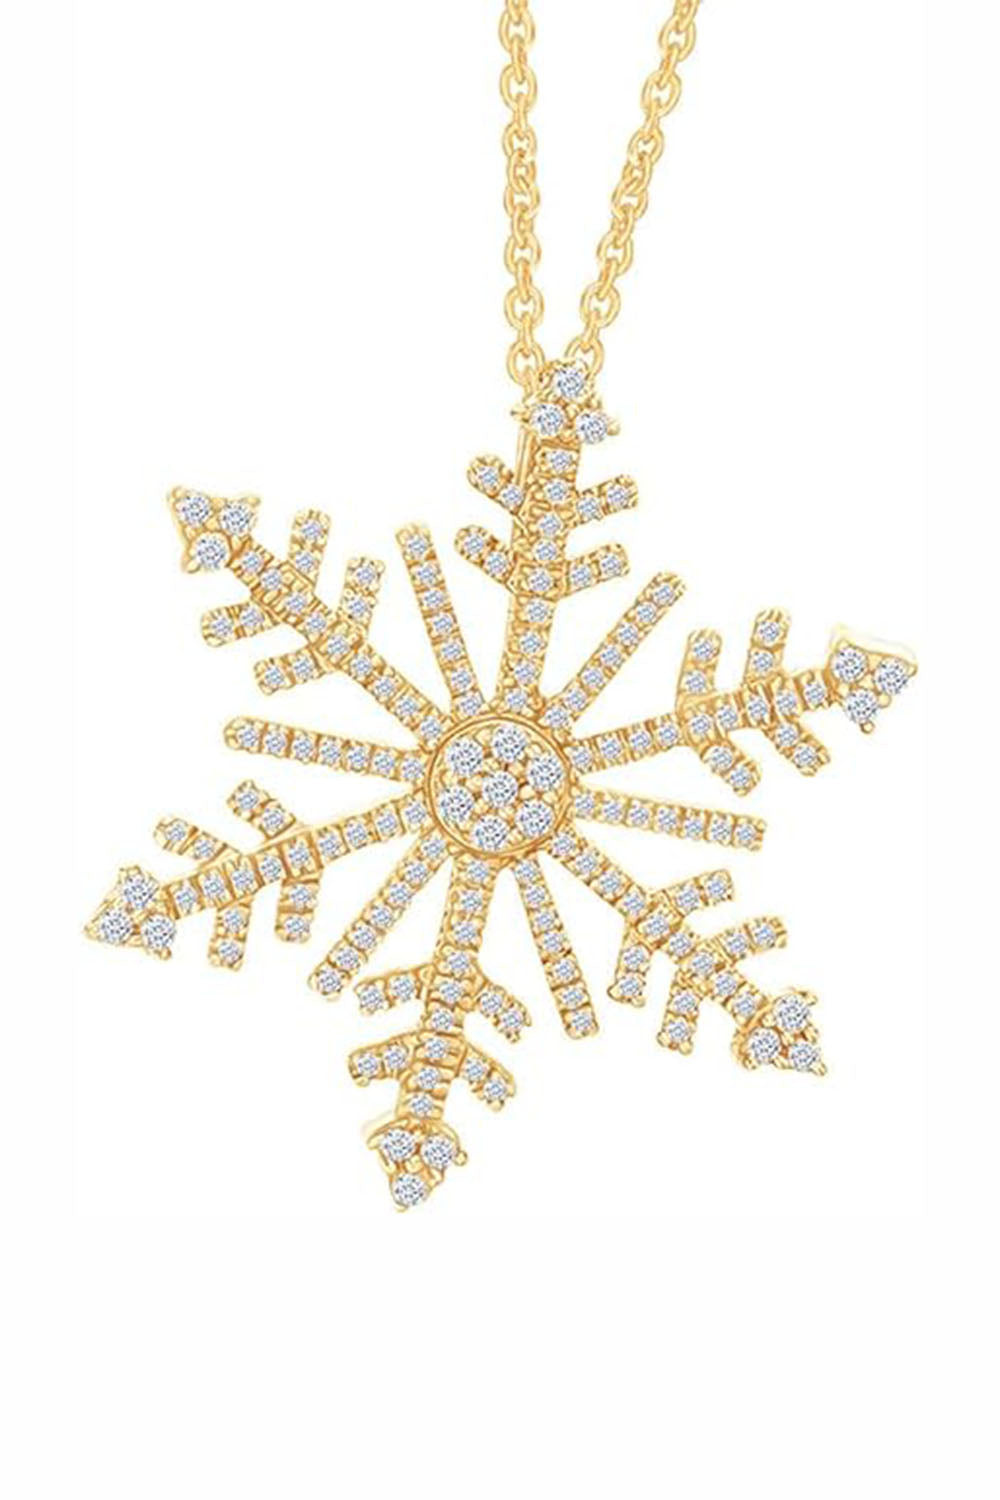 1/2 Carat Moissanite Snowflake Pendant Necklace in 18K Gold Plated Sterling Silver Anniversary Christmas Jewellery Gift.